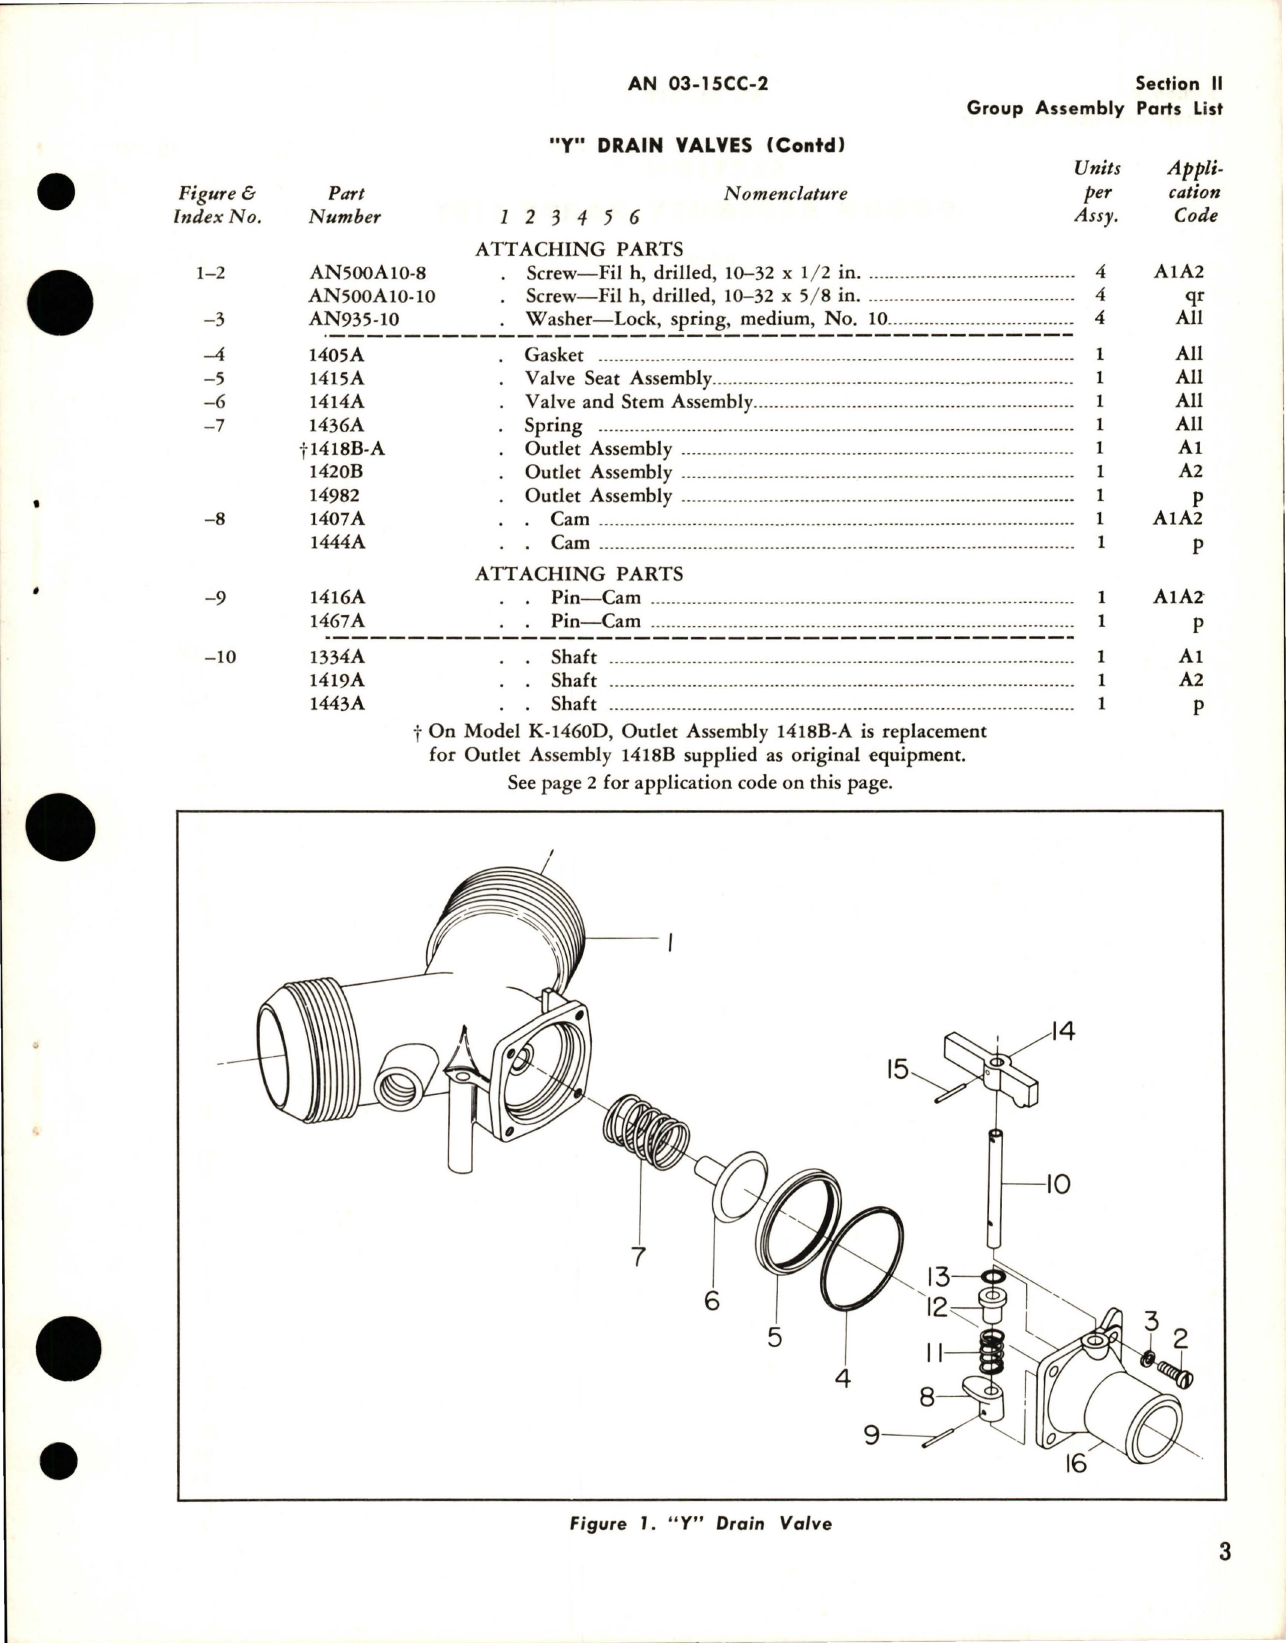 Sample page 5 from AirCorps Library document: Parts Catalog for Y Drain, Straight Drain and Defueling Valves